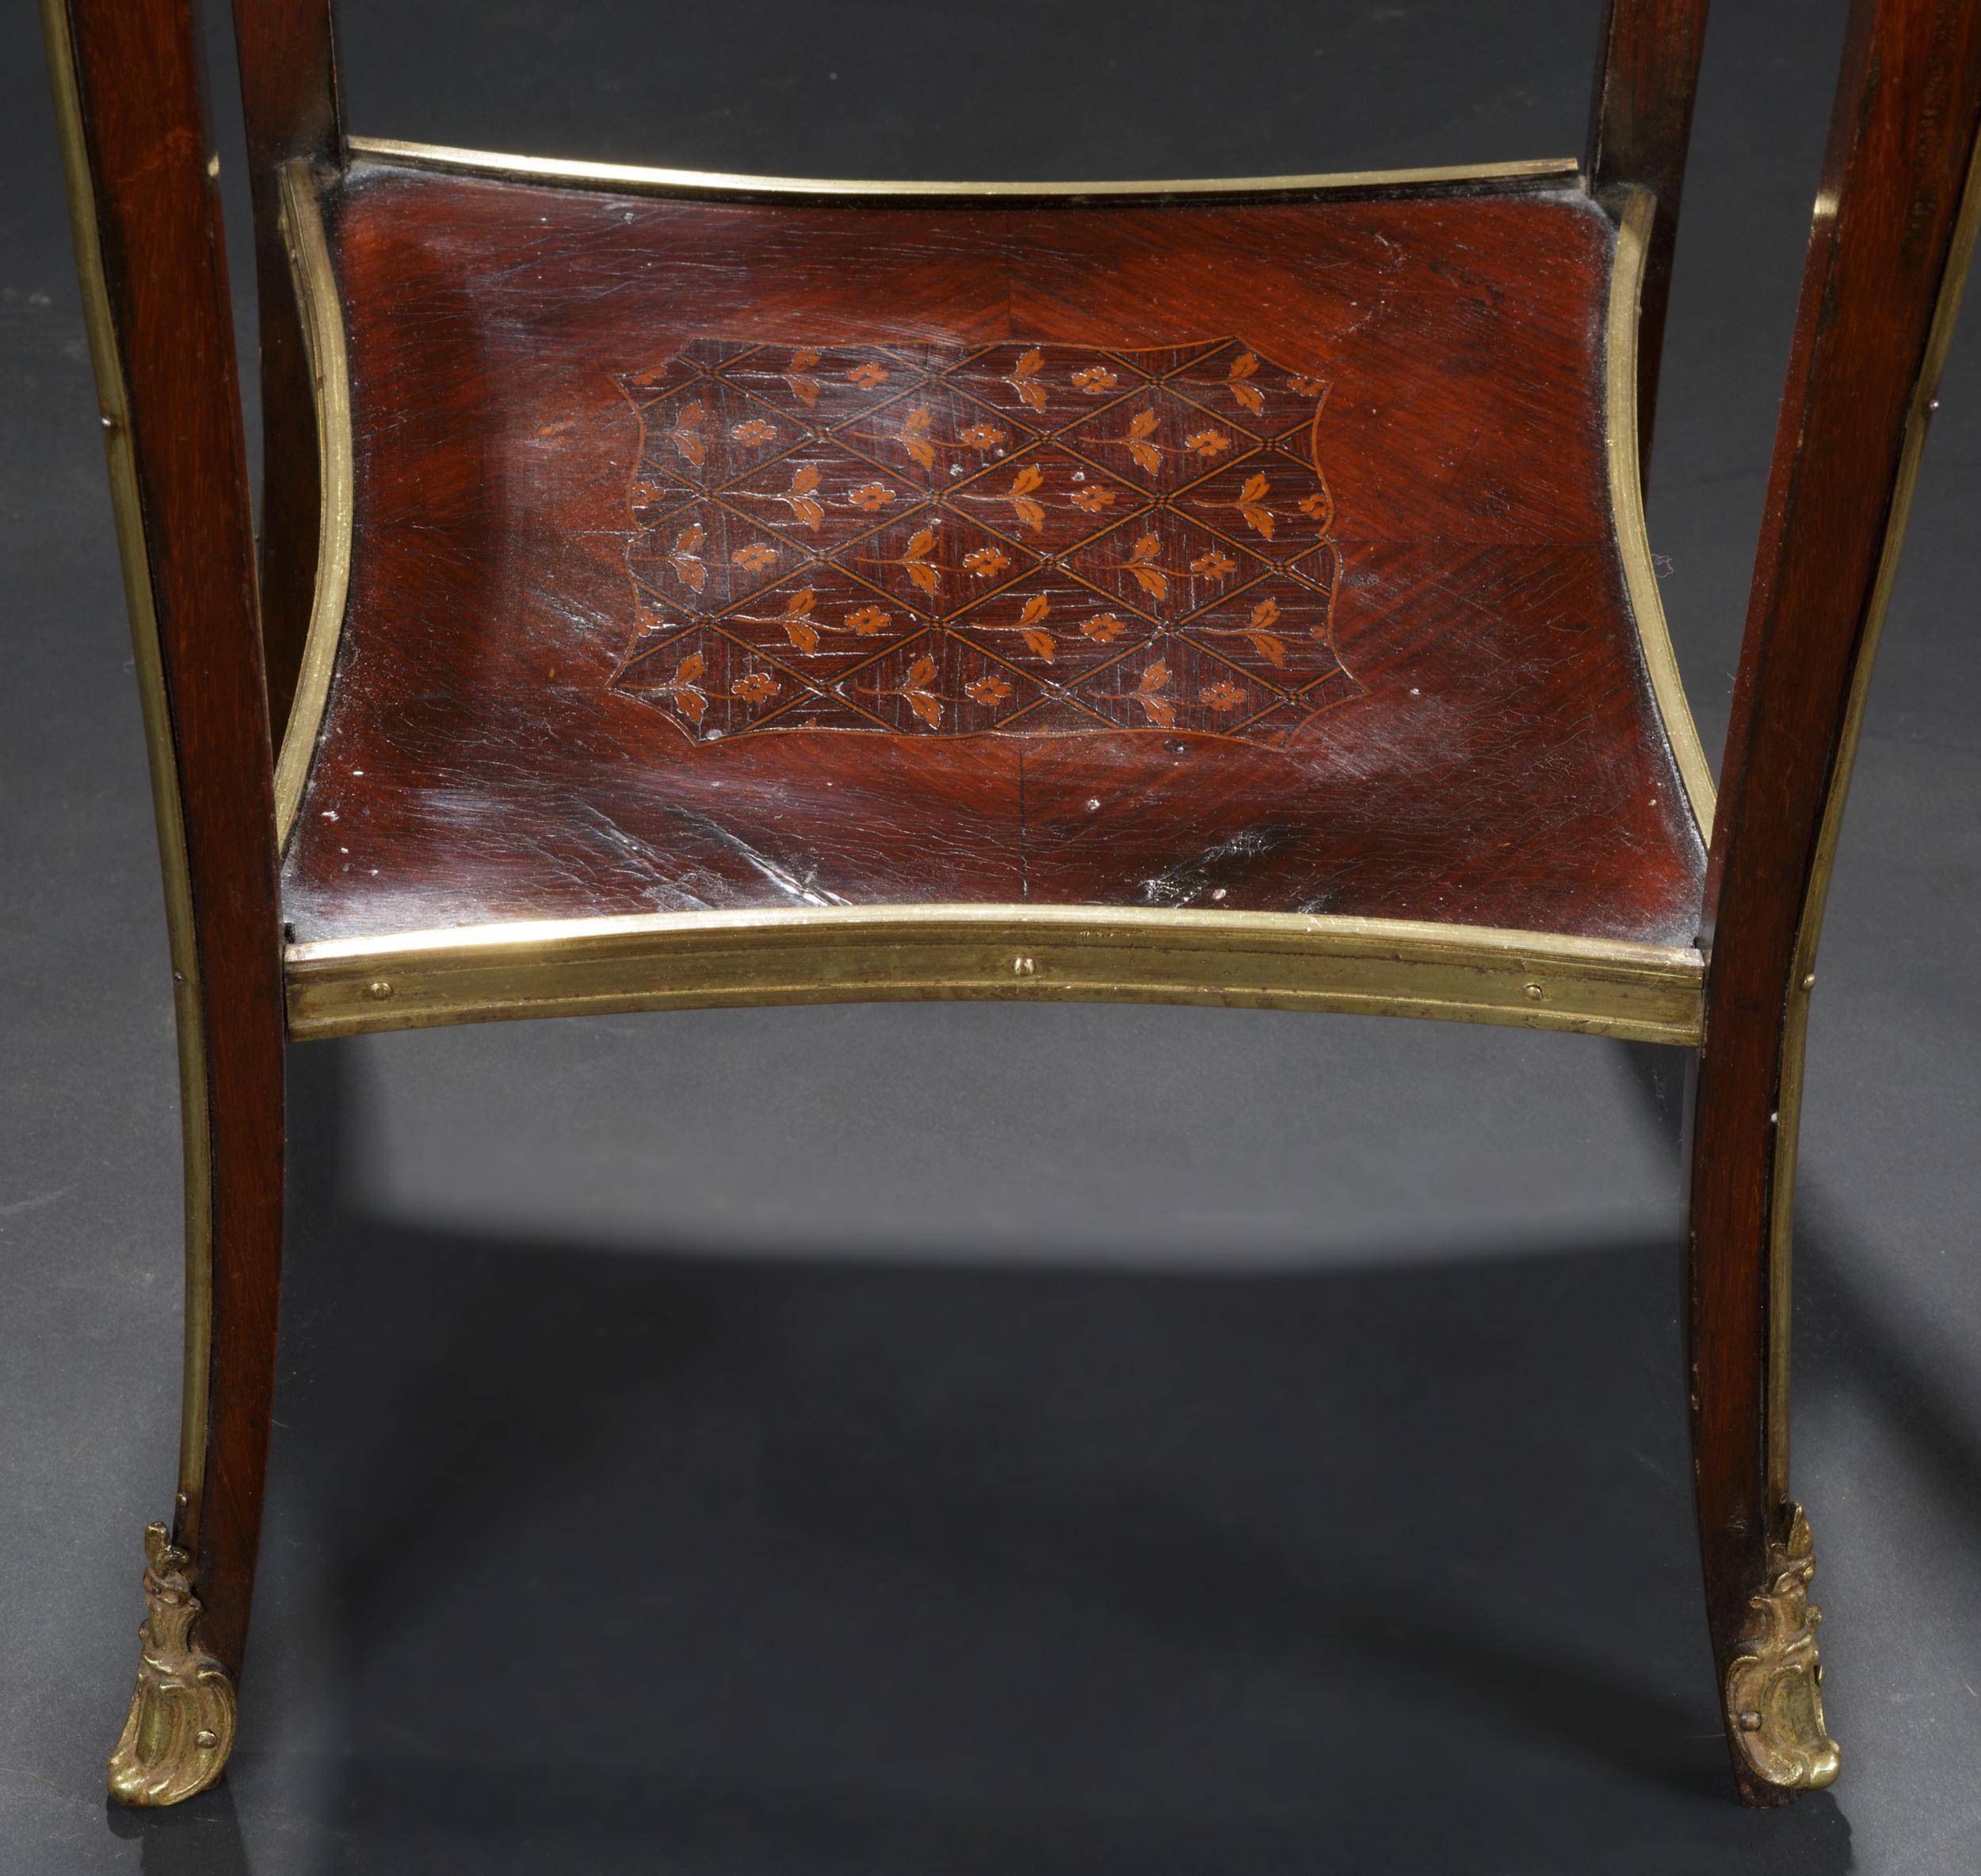 19th century small French inlaid mahogany table with brass bound top and ormolu mounts and handle. Single drawer .c.1880.